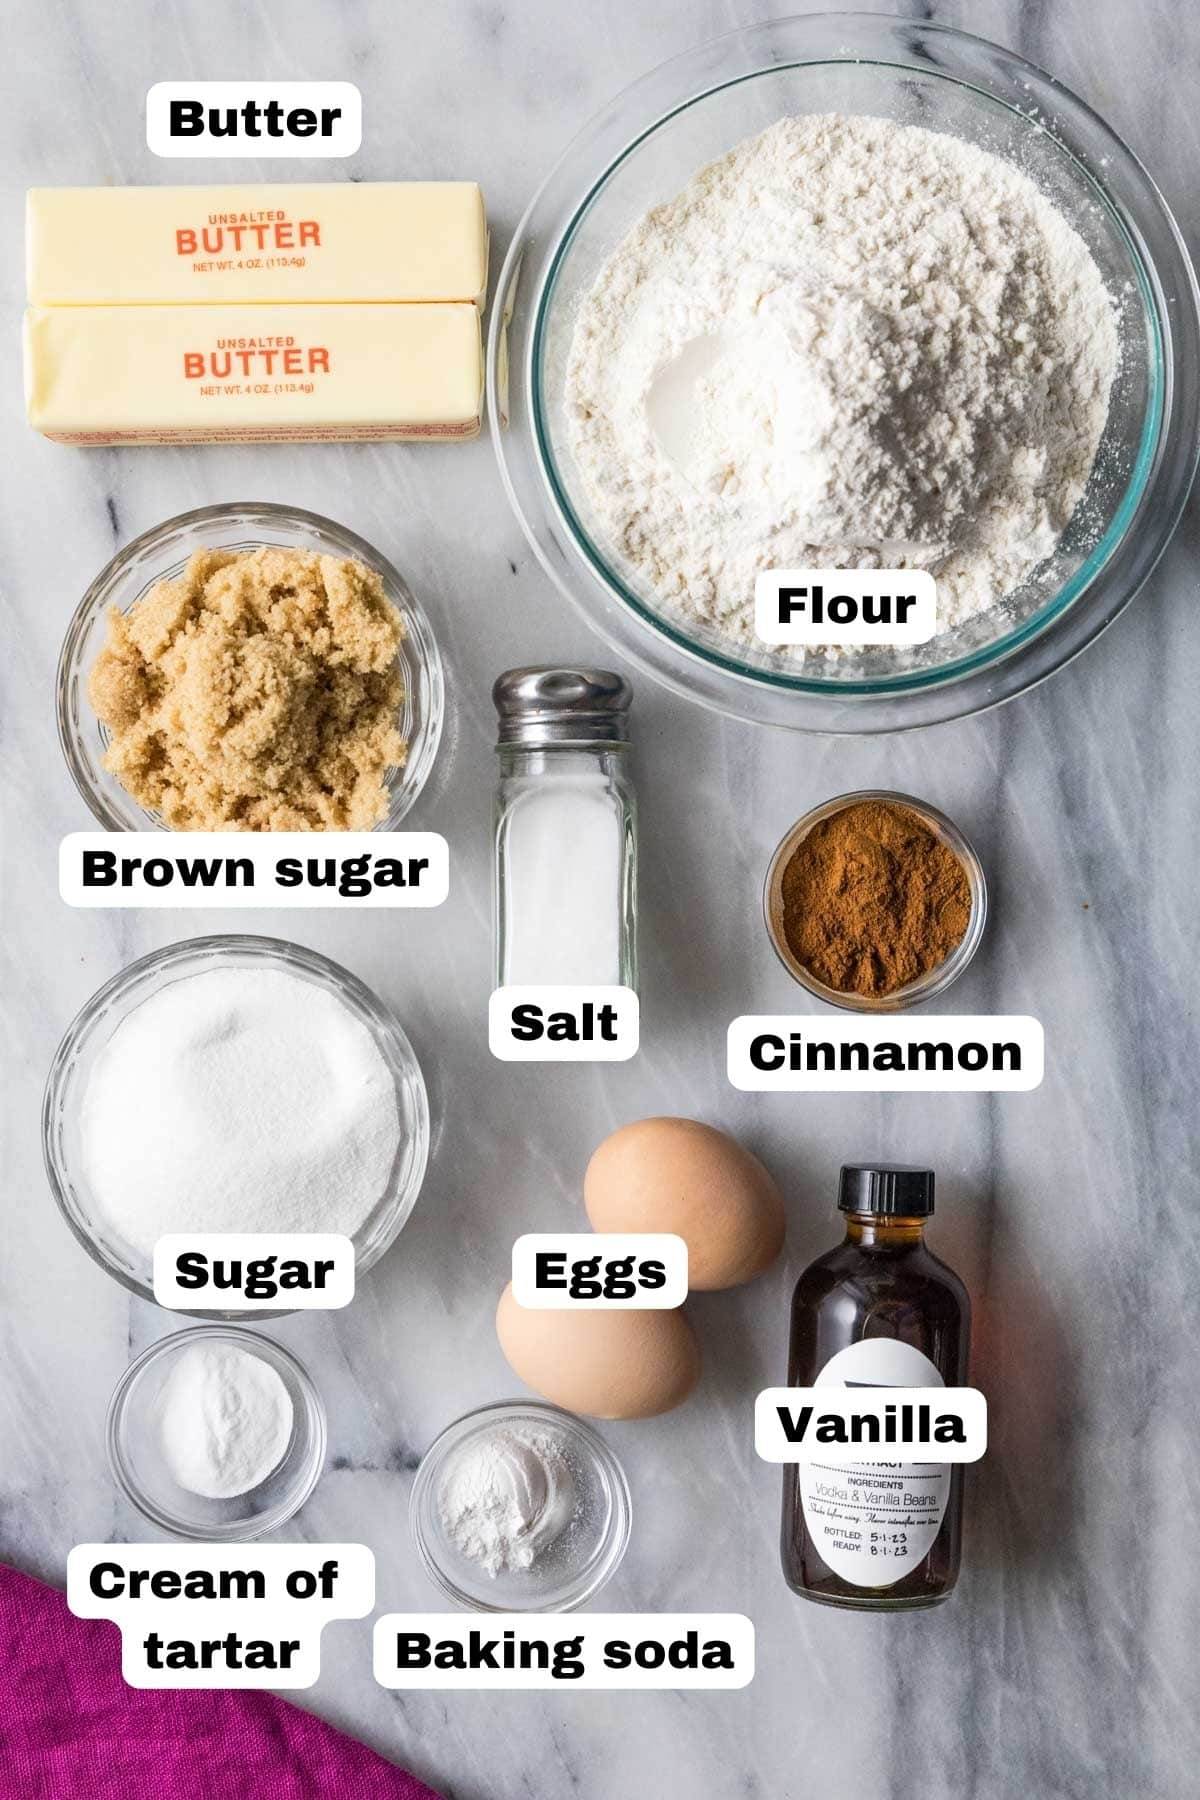 Overhead view of labelled ingredients including butter, cinnamon, cream of tartar, and more.